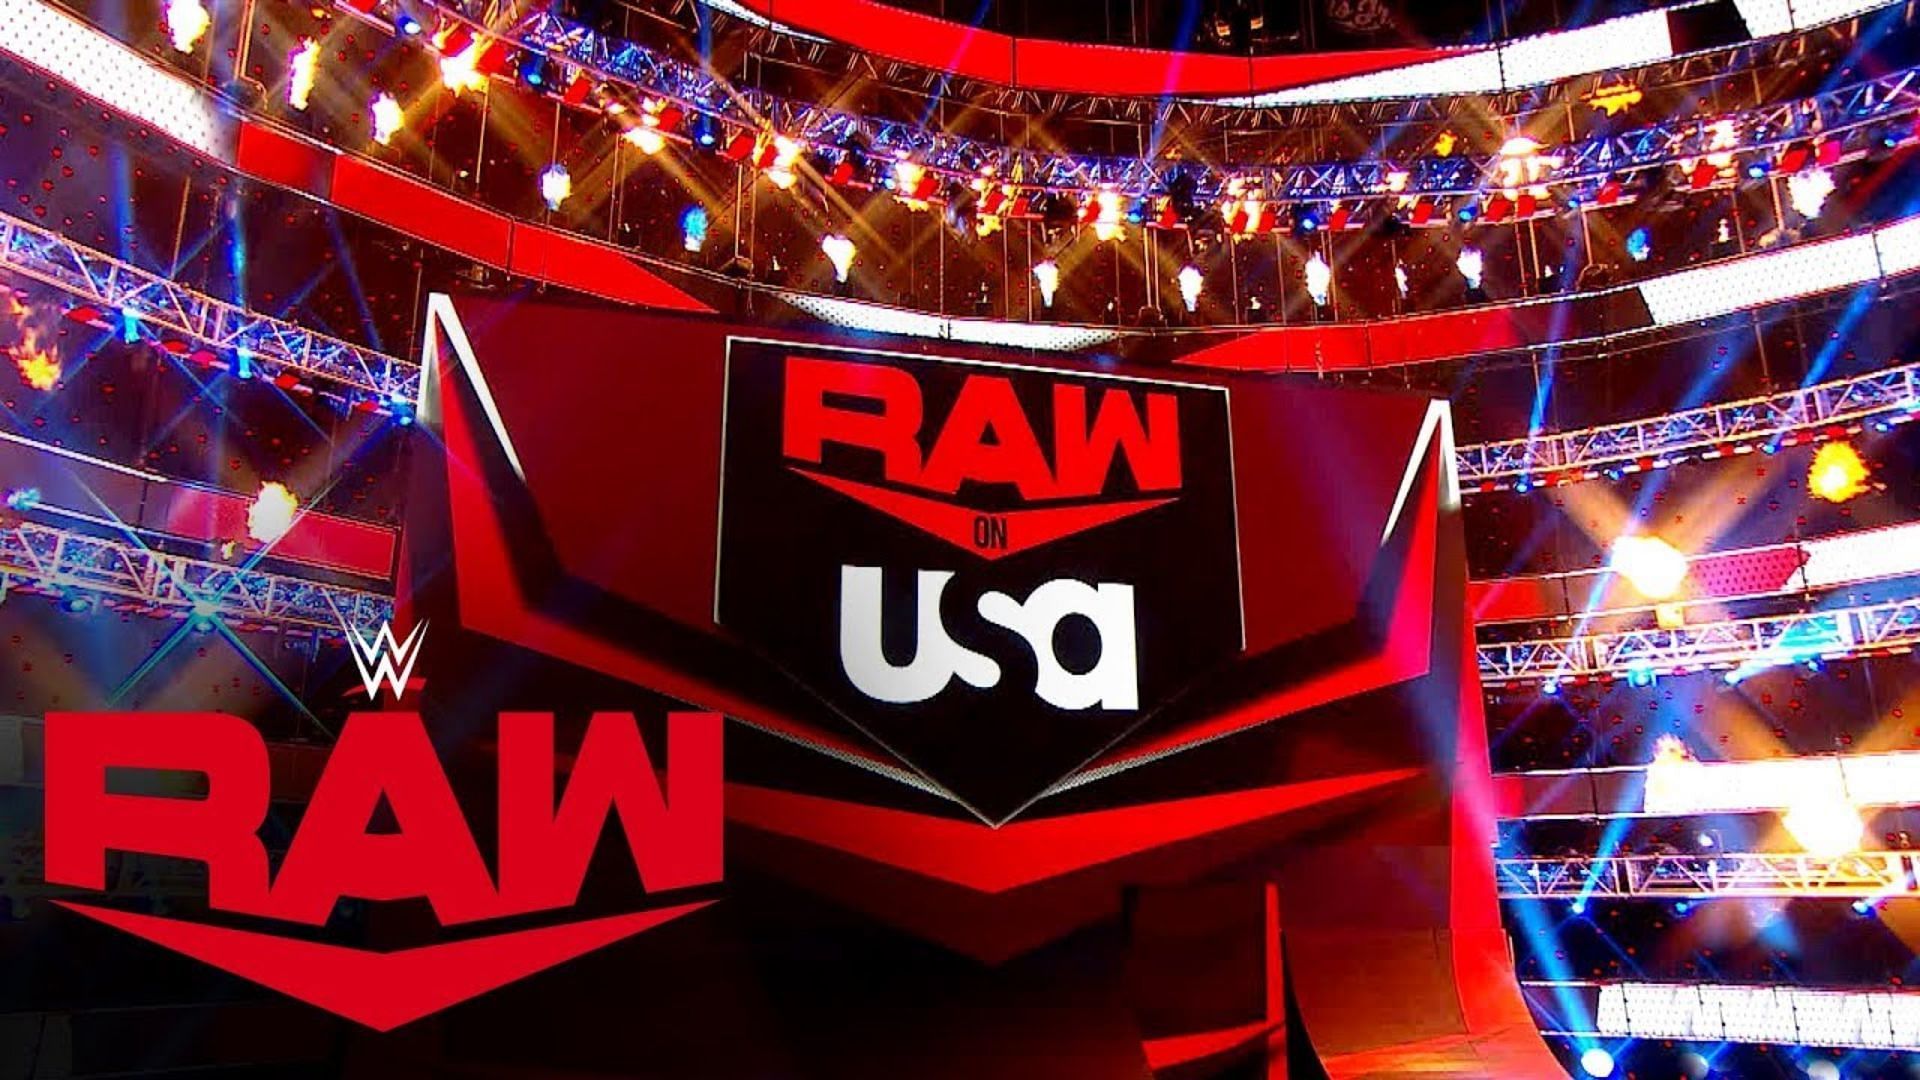 The star is back on WWE RAW tonight